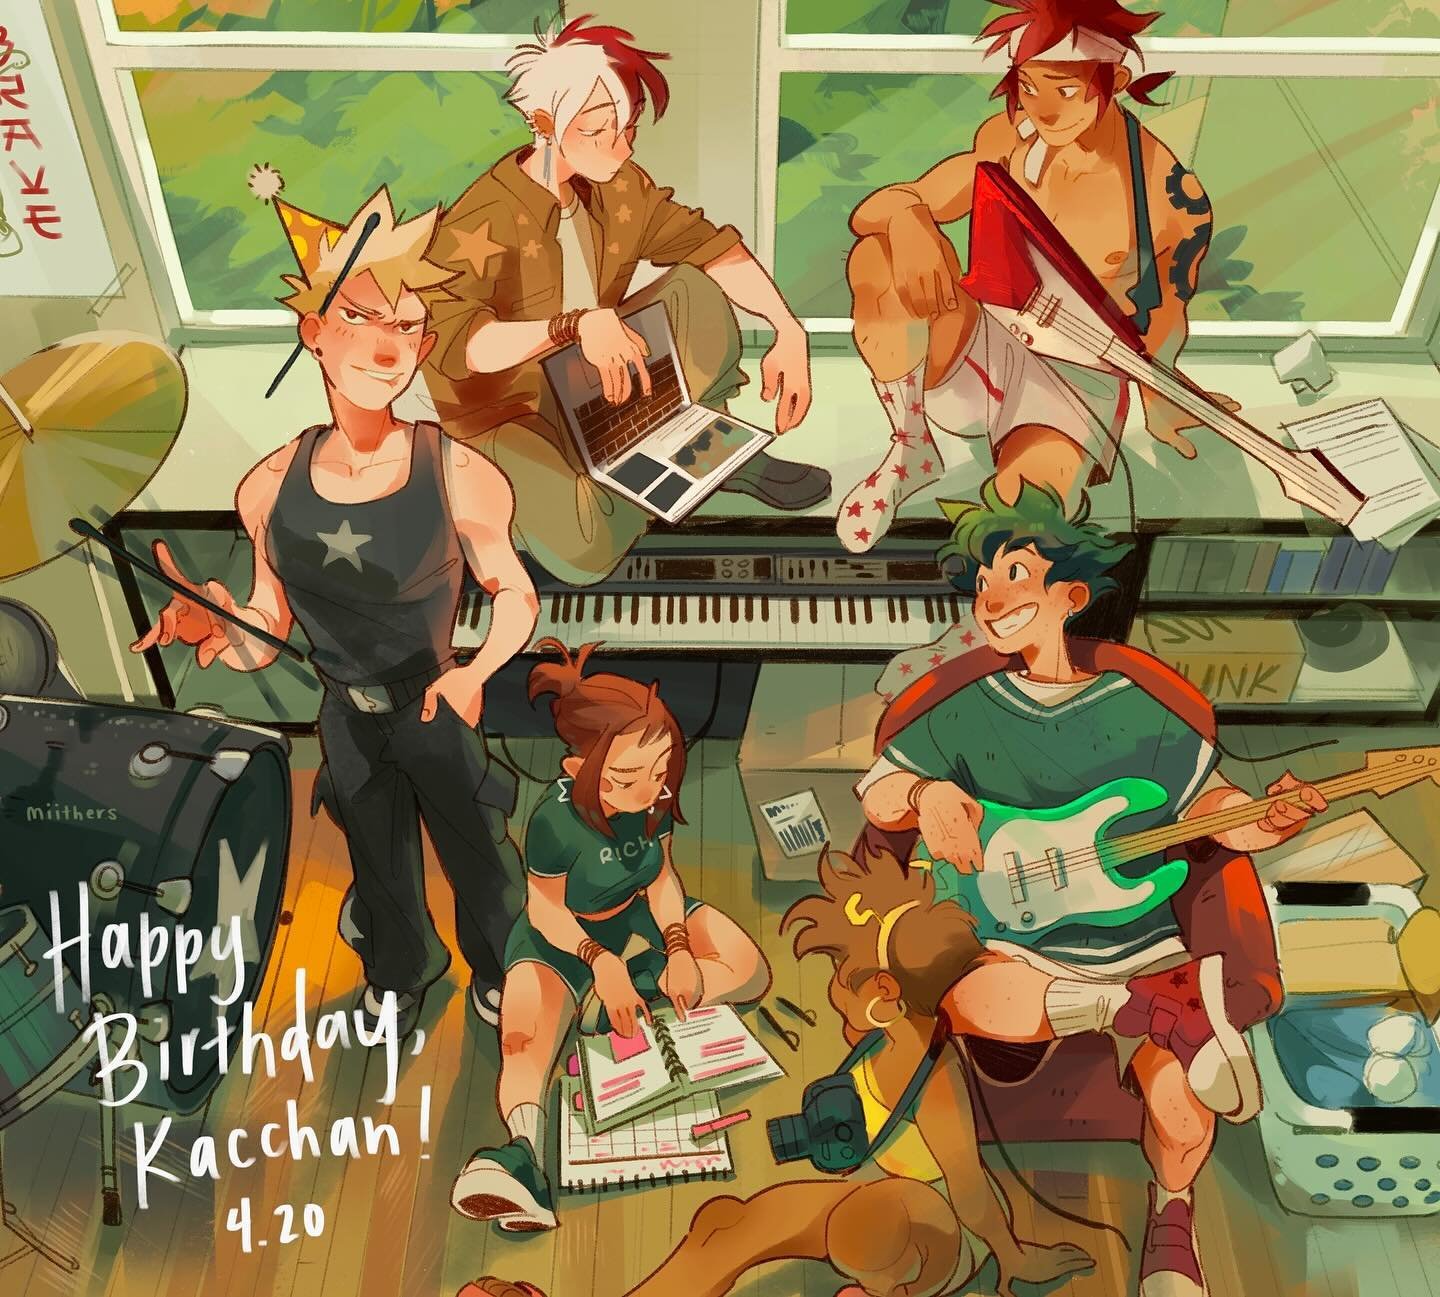 4.20 &mdash; happy birthday katsuki, you gigantic nerd!!

this is from a band au that @daniartonline and i created!! scroll for a little more lore :) AND if you scroll far enough, i have a #krbk treat ;) all the good things on this kid&rsquo;s birthd